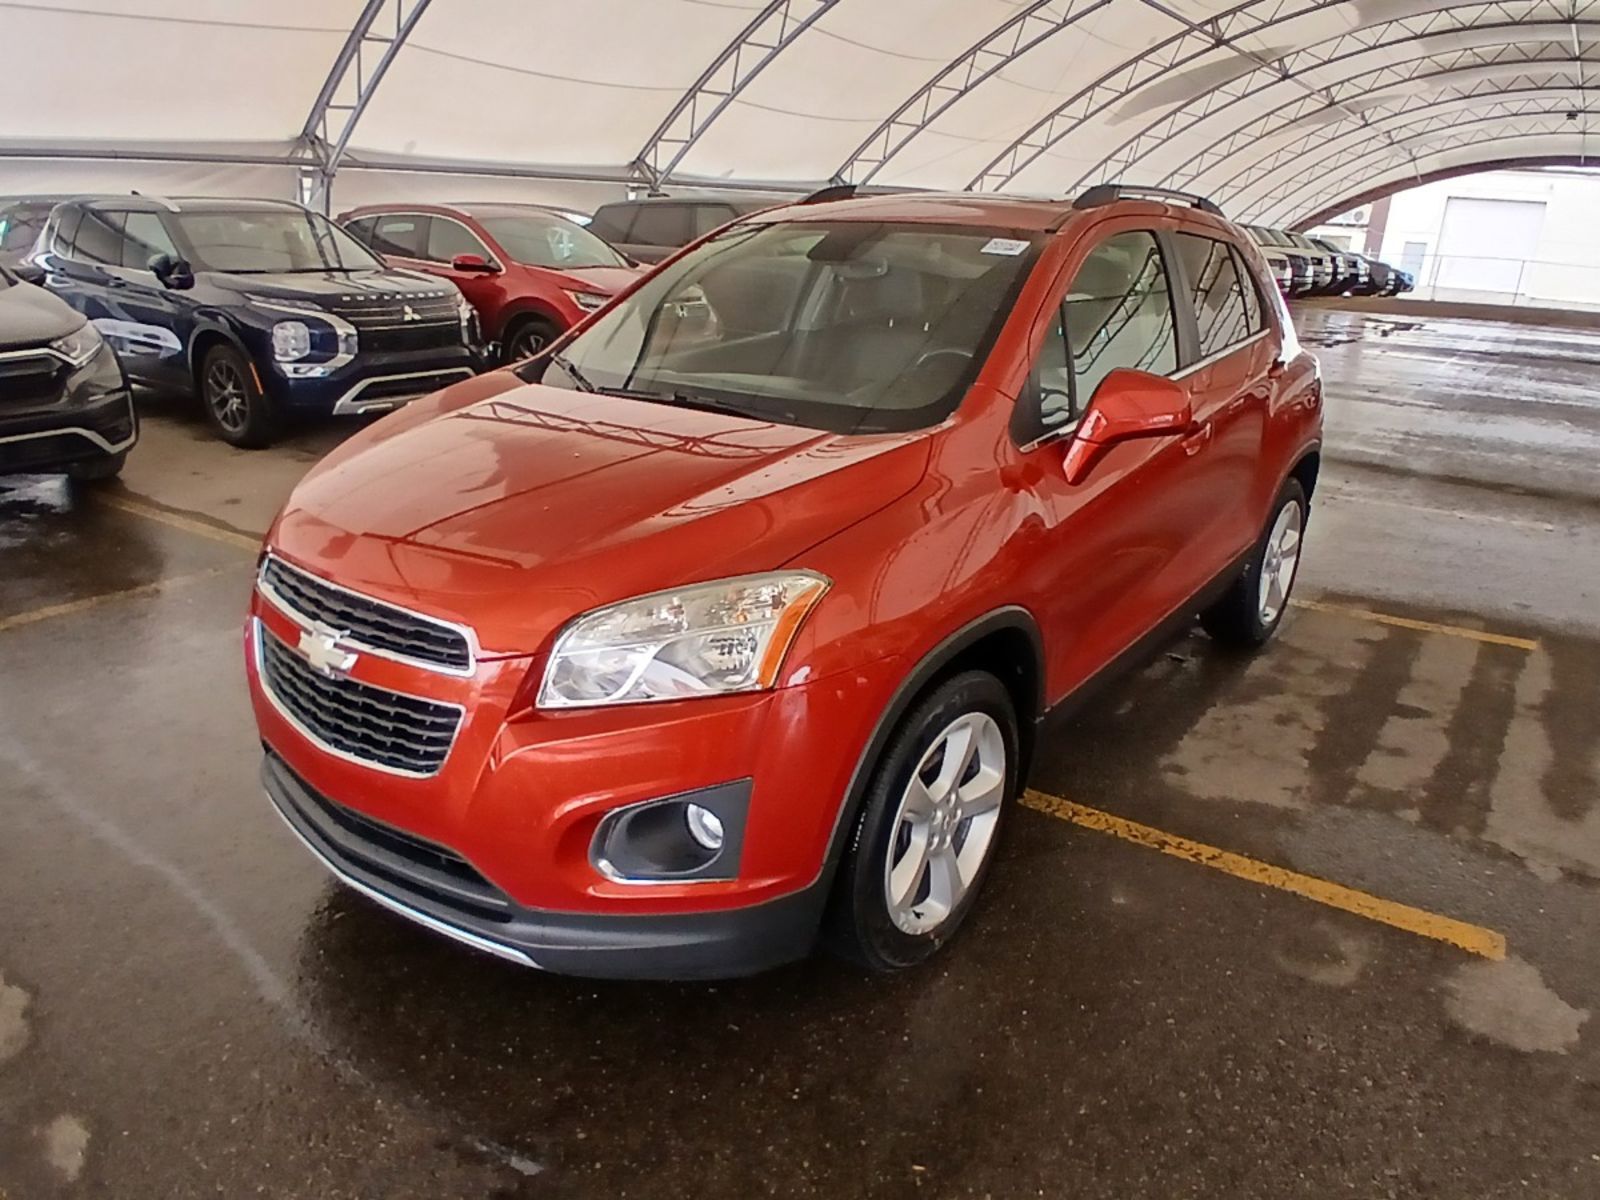 2015 Chevrolet Trax LTZ - One Owner, Heated Seats, Back Up Camera